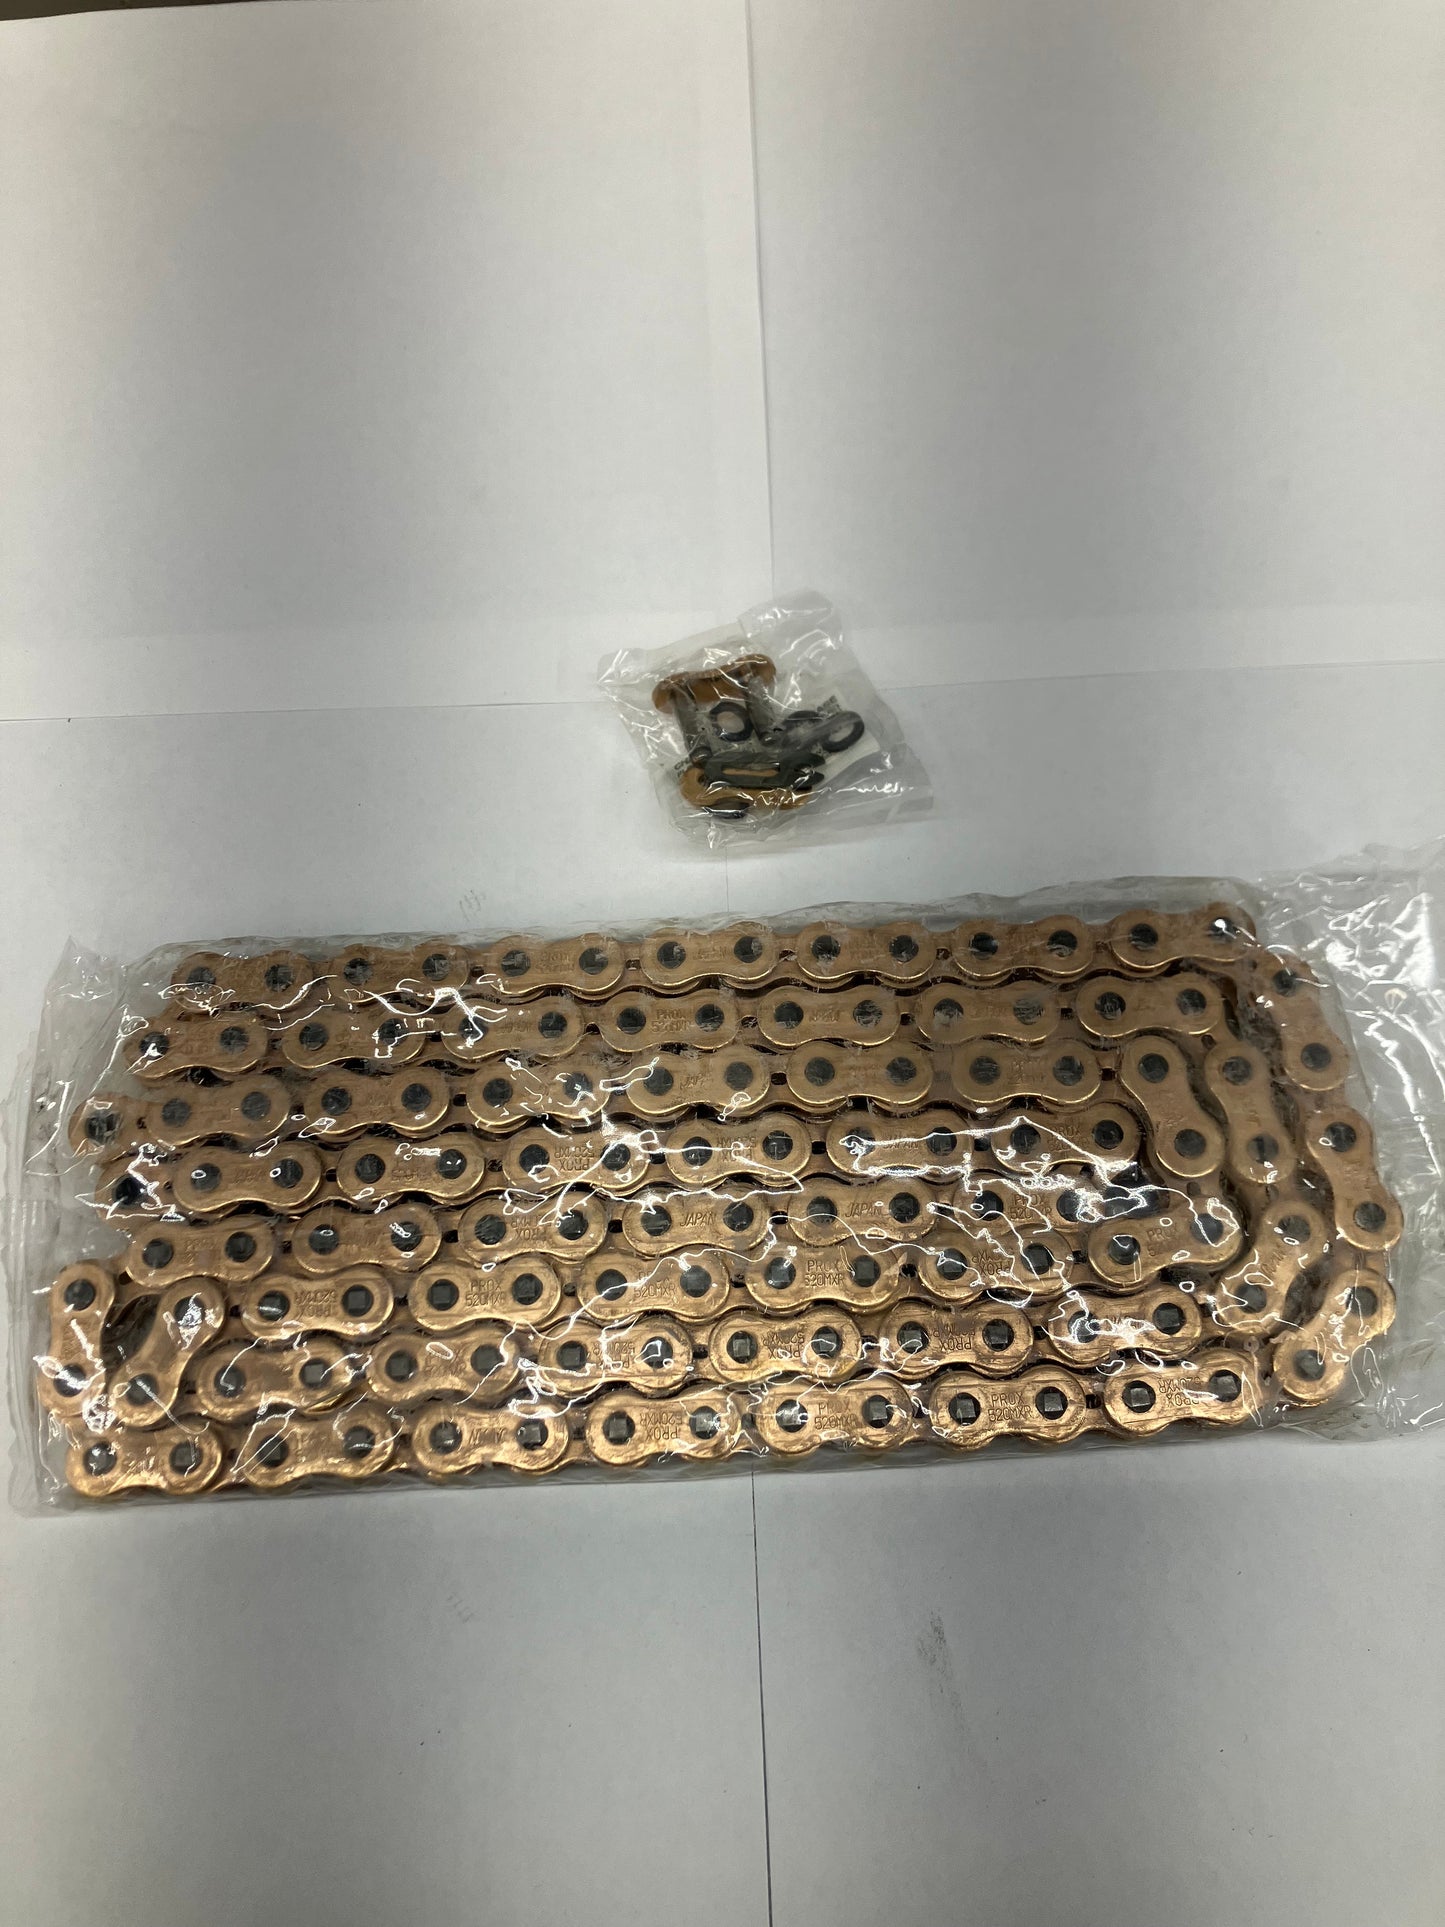 PROX 520 X-RING GOLD CHAIN 120 LINK W/ CLIP LINK 07.RC520120XCG